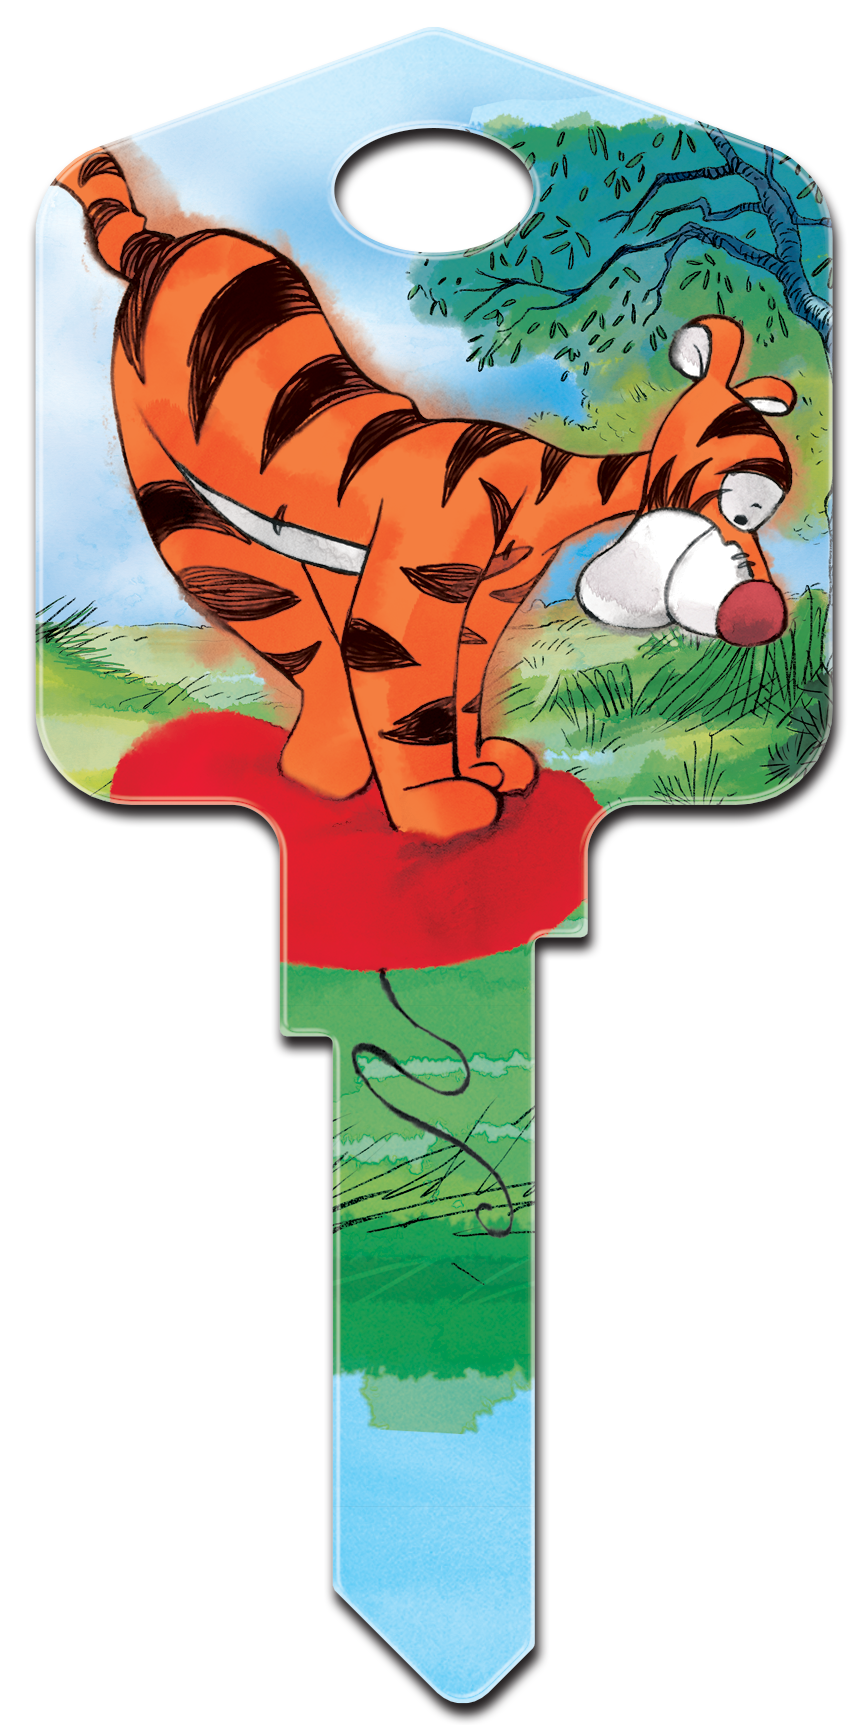 Eeyore and Tigger house key SC1 68 From Disney's Whinnie the Pooh 